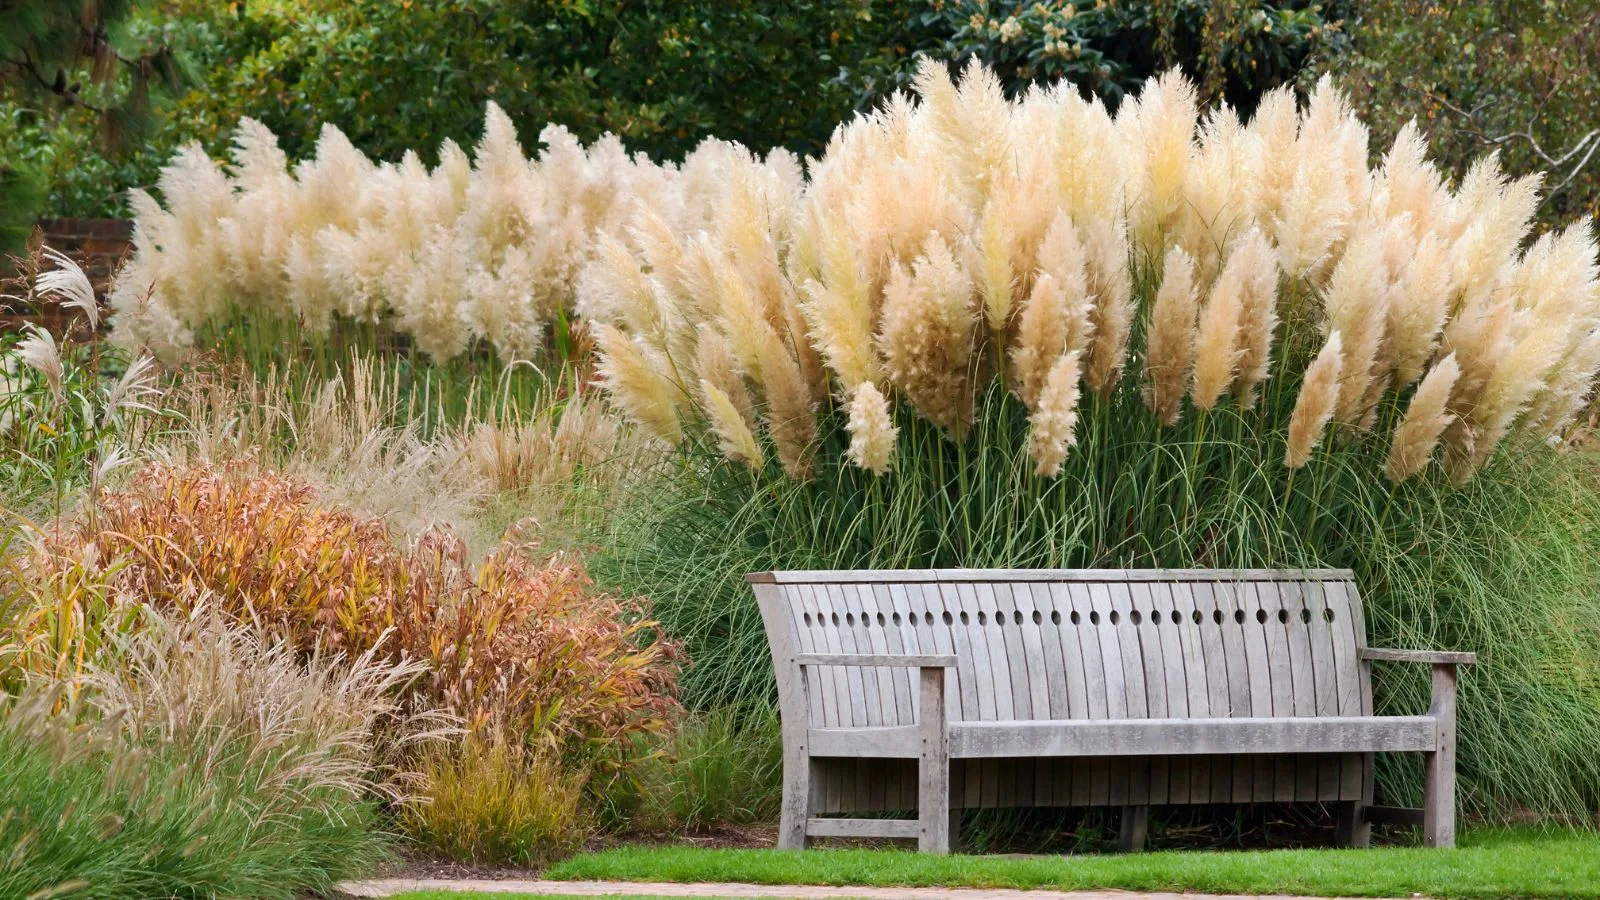 ornamental grasses behind a wooden bench.